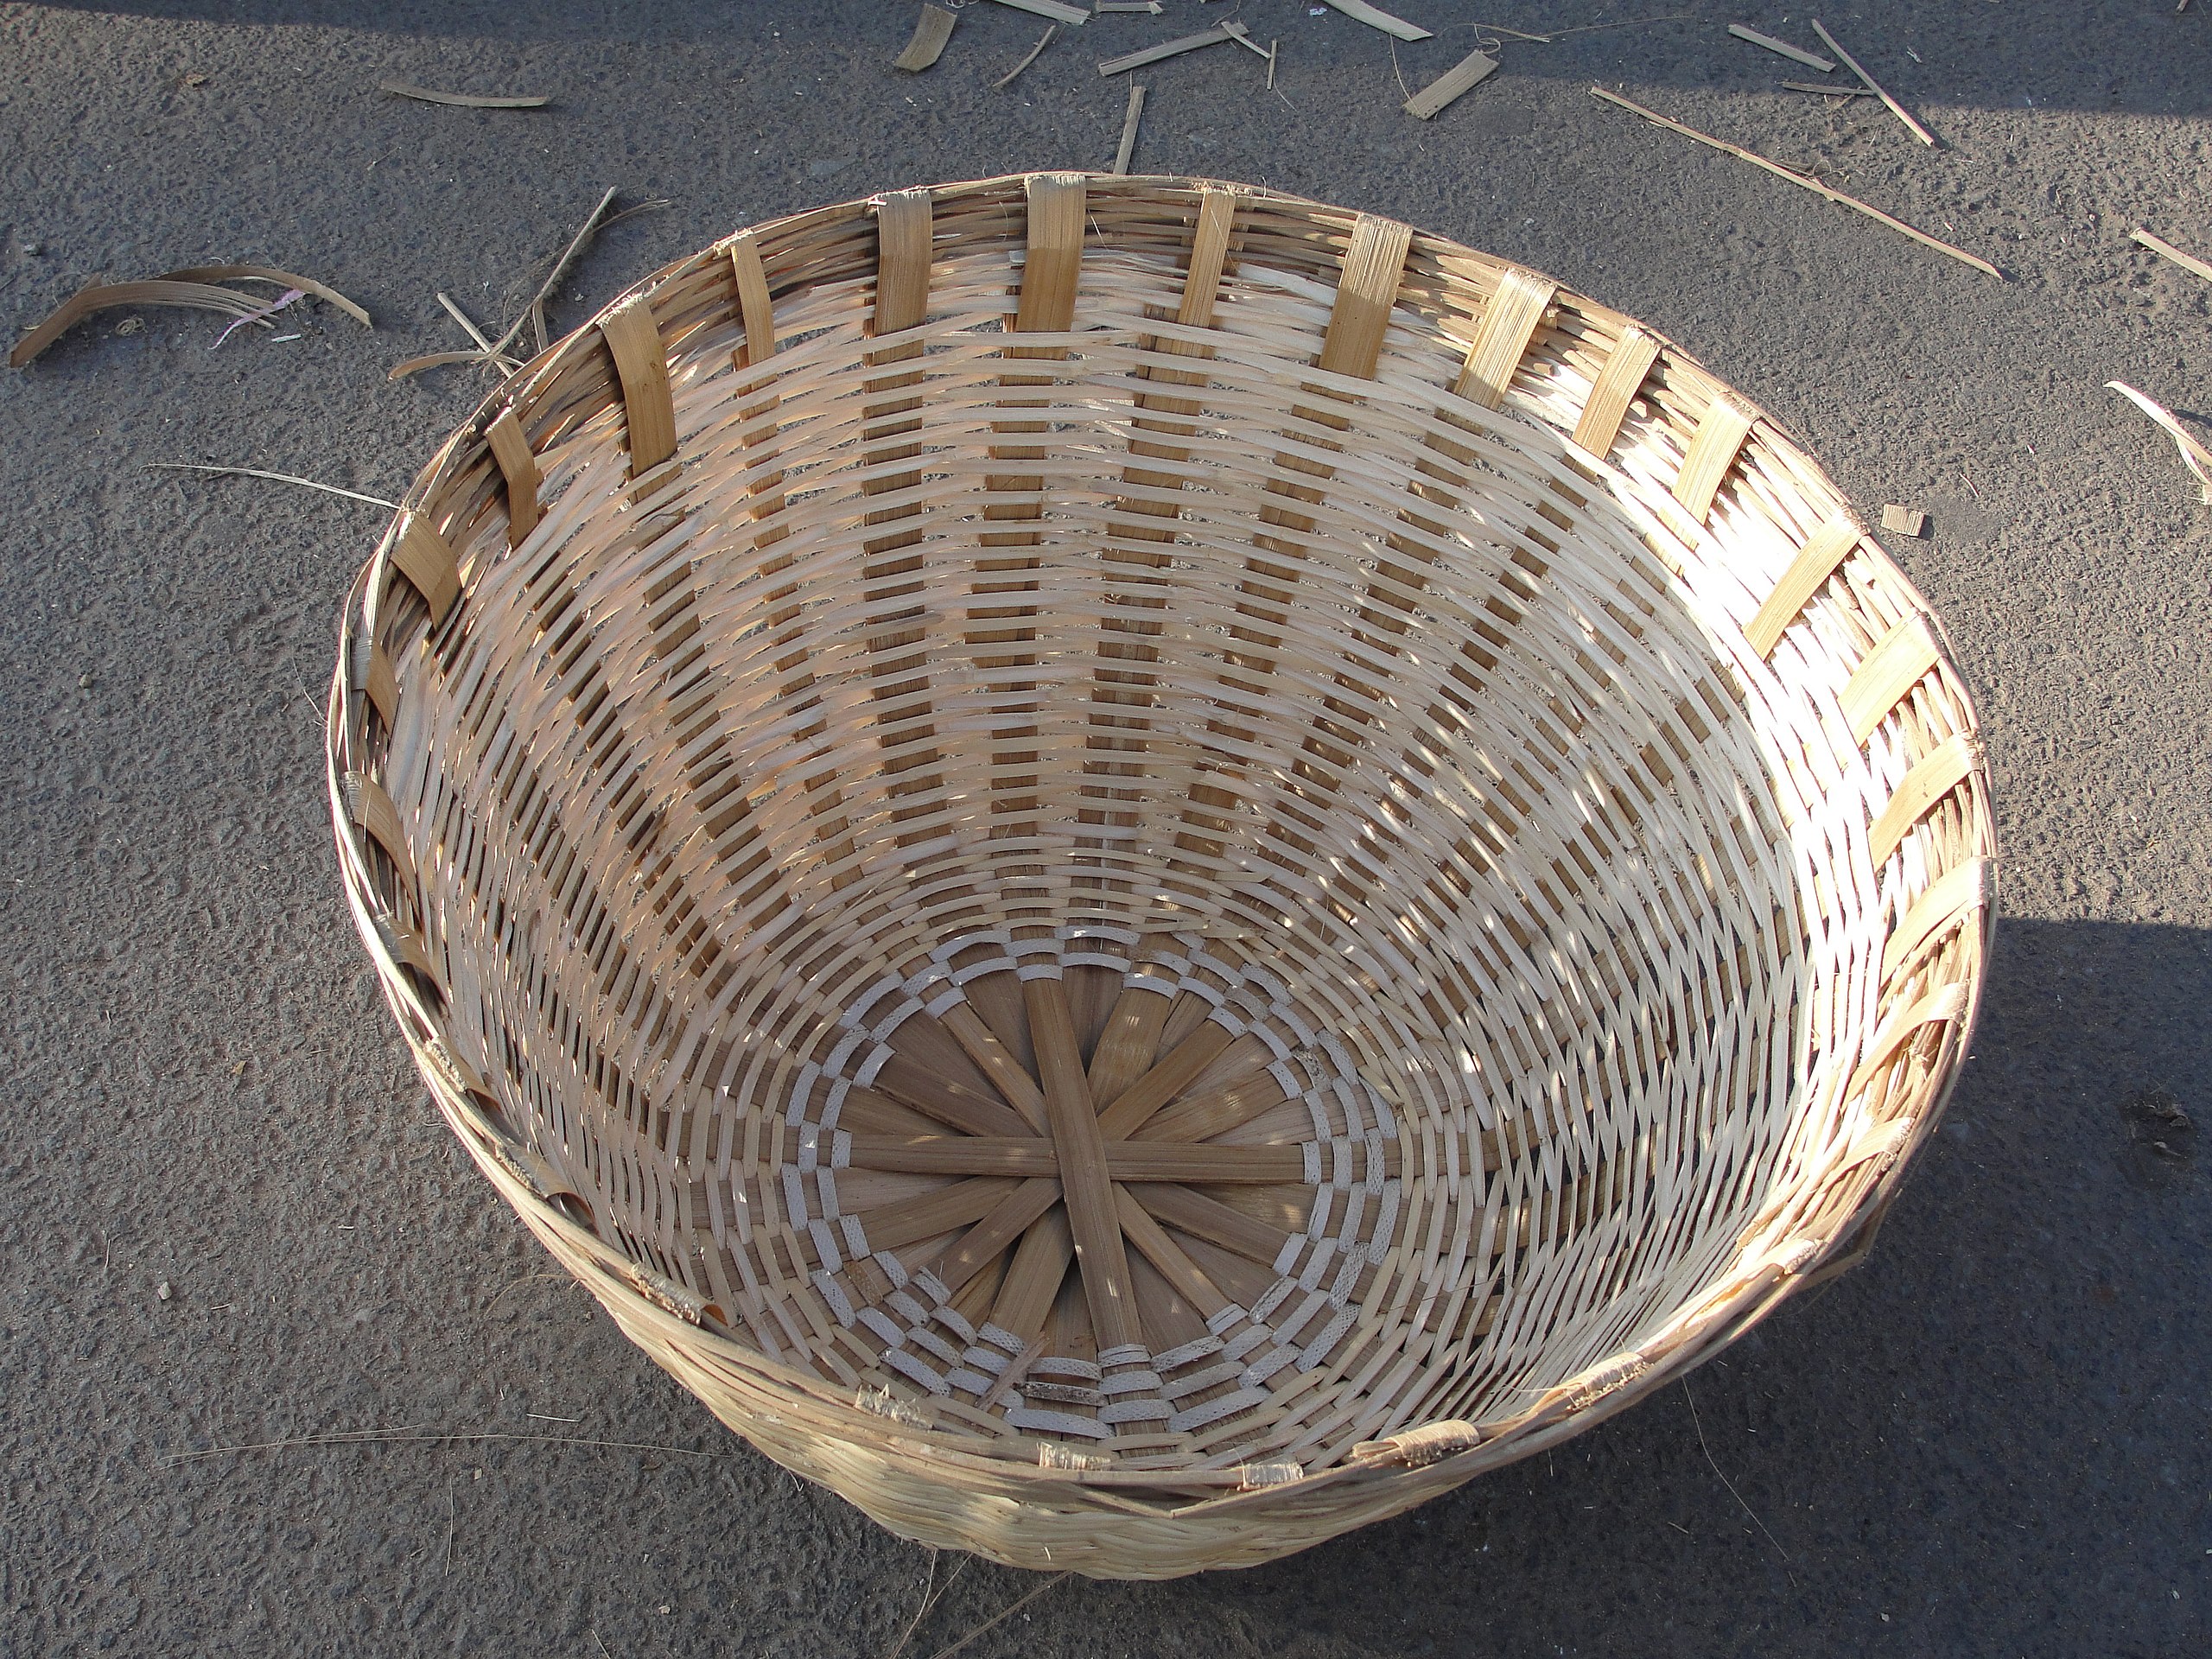 File:A bamboo basket big in size.JPG - Wikimedia Commons